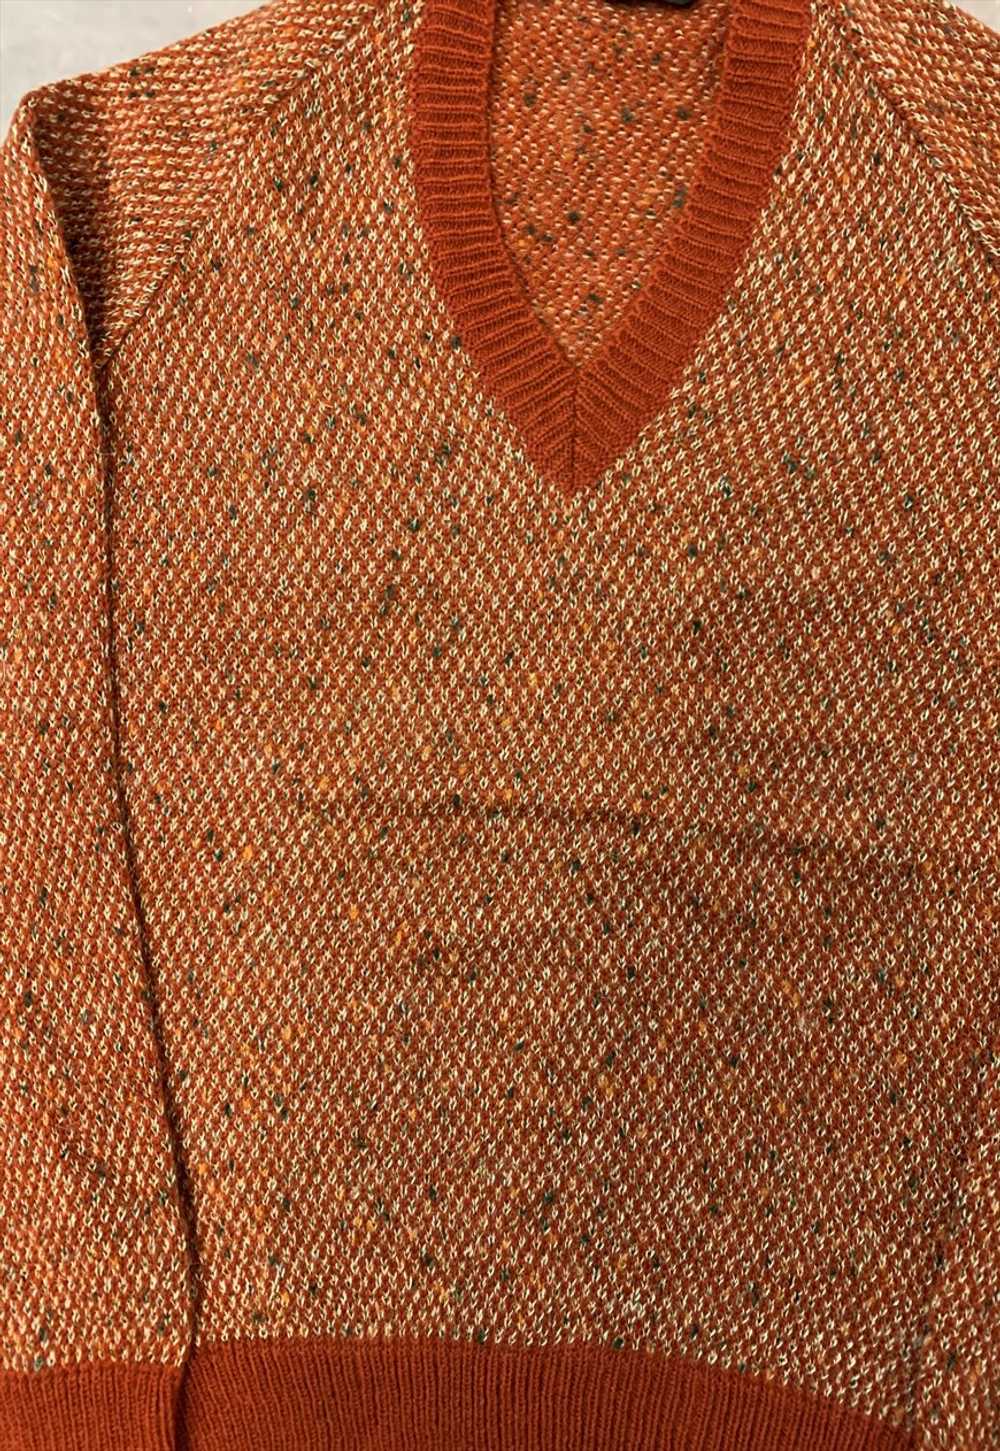 Vintage Knitted Jumper Abstract Patterned Knit Sw… - image 3